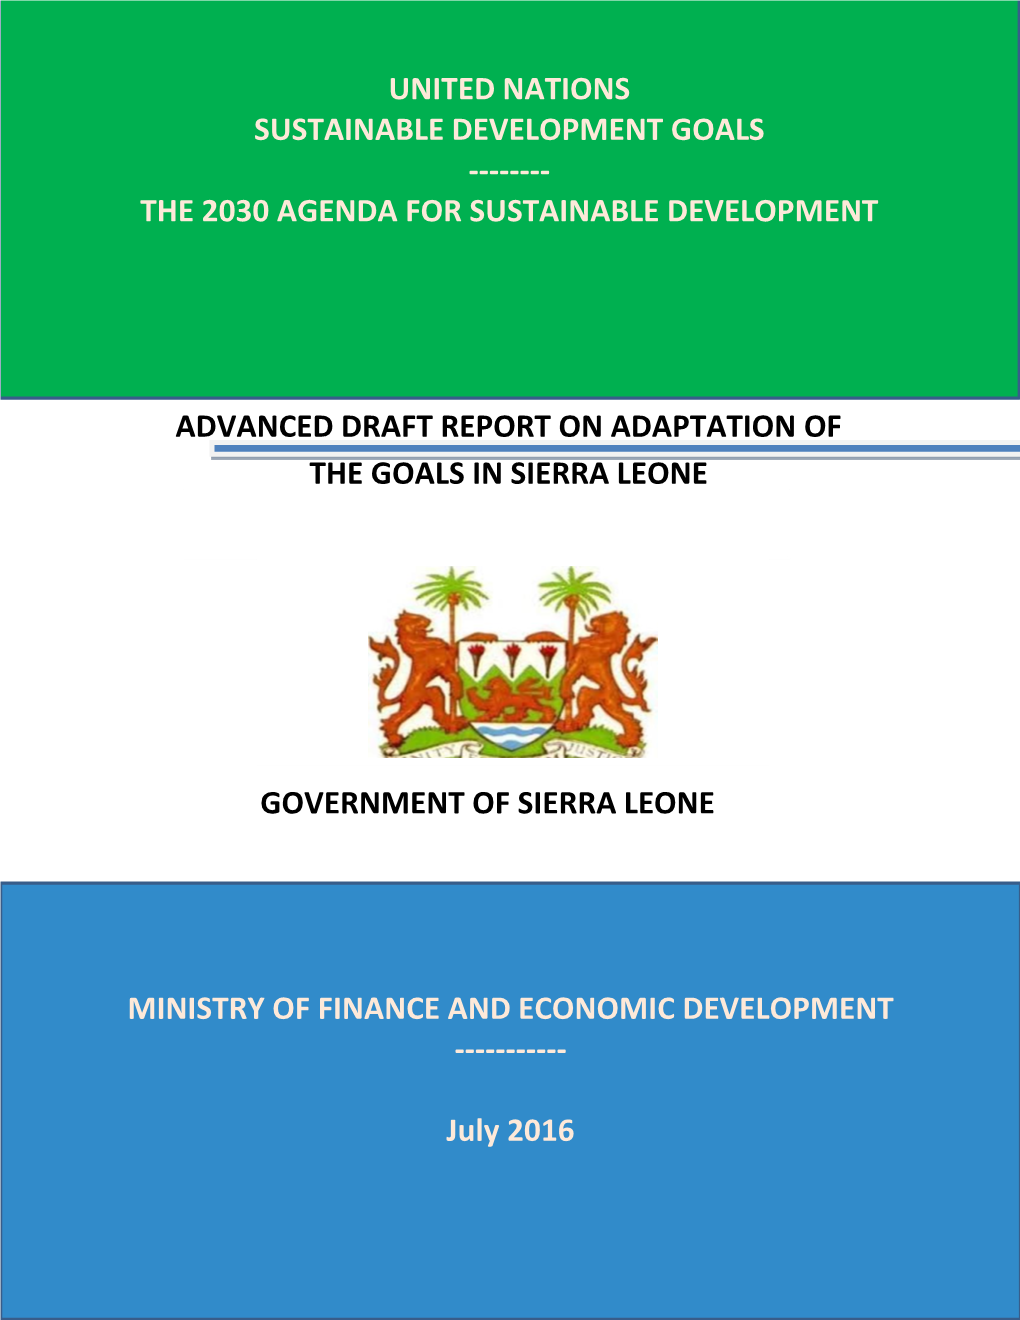 Advanced Draft Report on Adaptation of the Goals in Sierra Leone